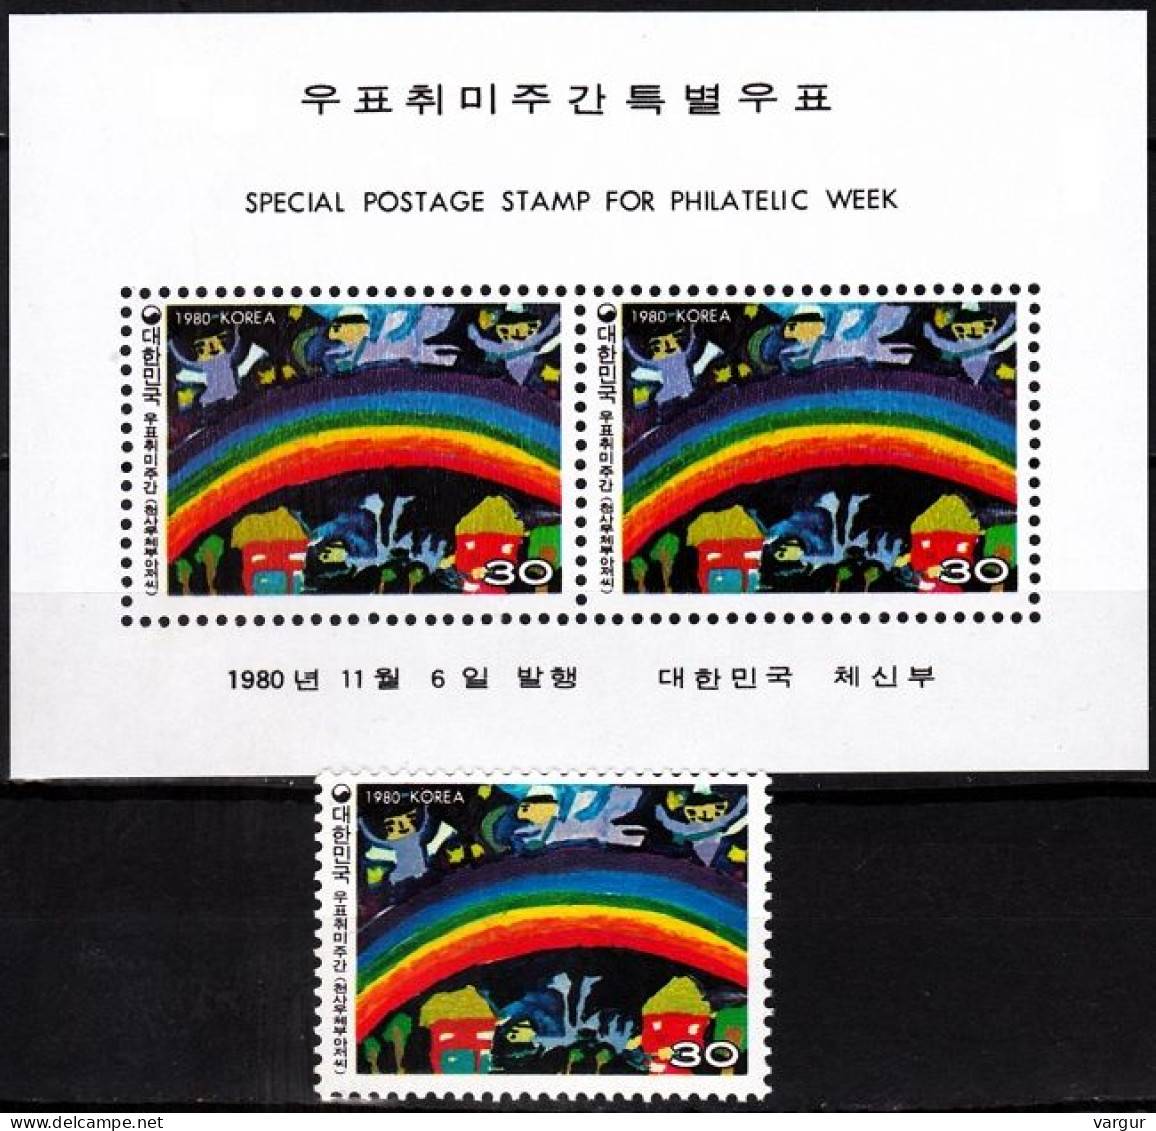 KOREA SOUTH 1980 Philatelic Week. Child's Drawing - Rainbow. Single And Souvenir Sheet, MNH - Stamp's Day